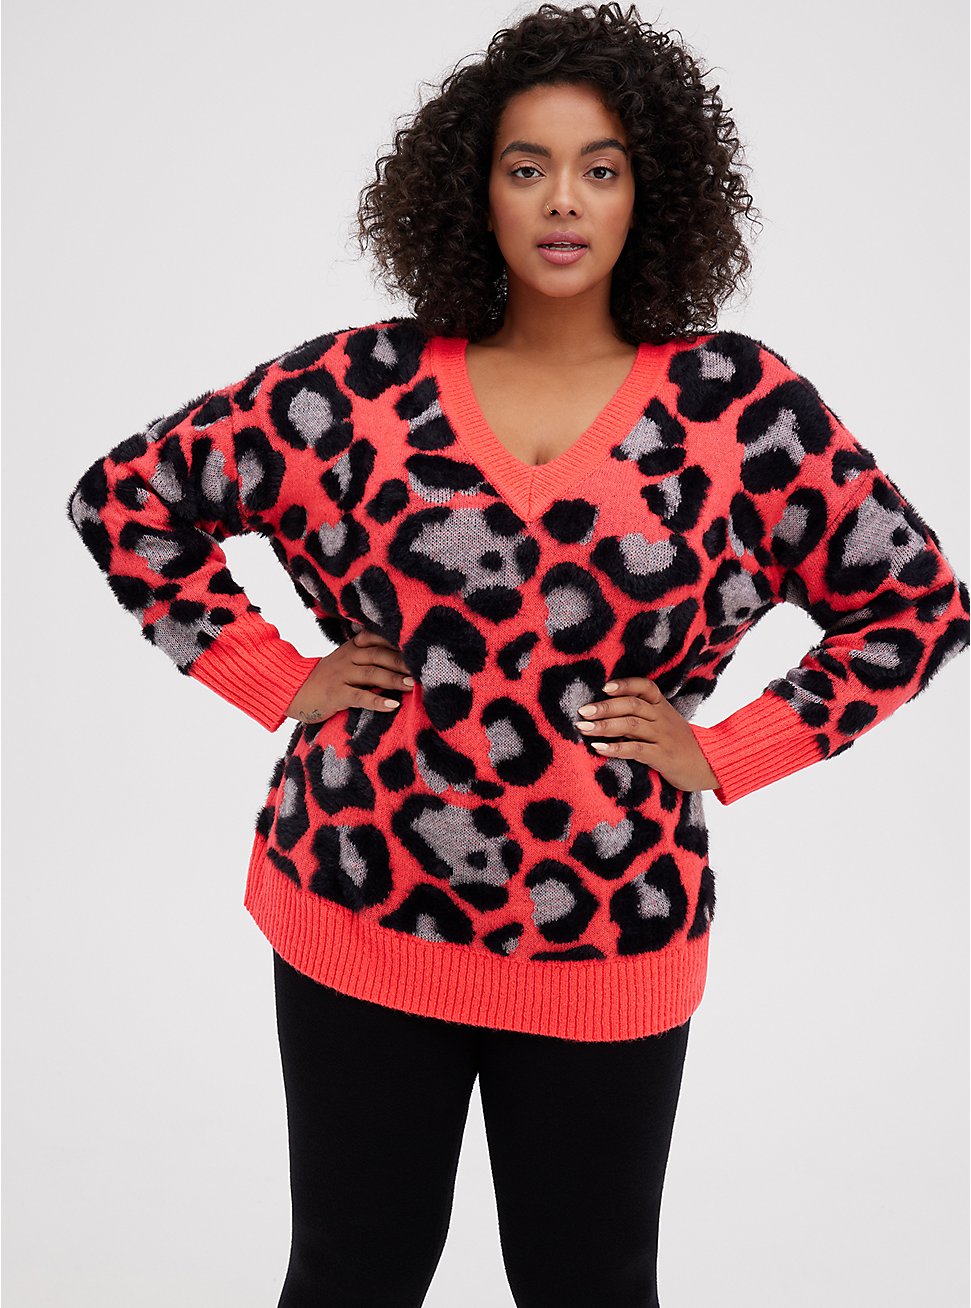 Plus Size Slouchy Tunic Pullover Sweater - Leopard Print Coral , MULTI, hi-res